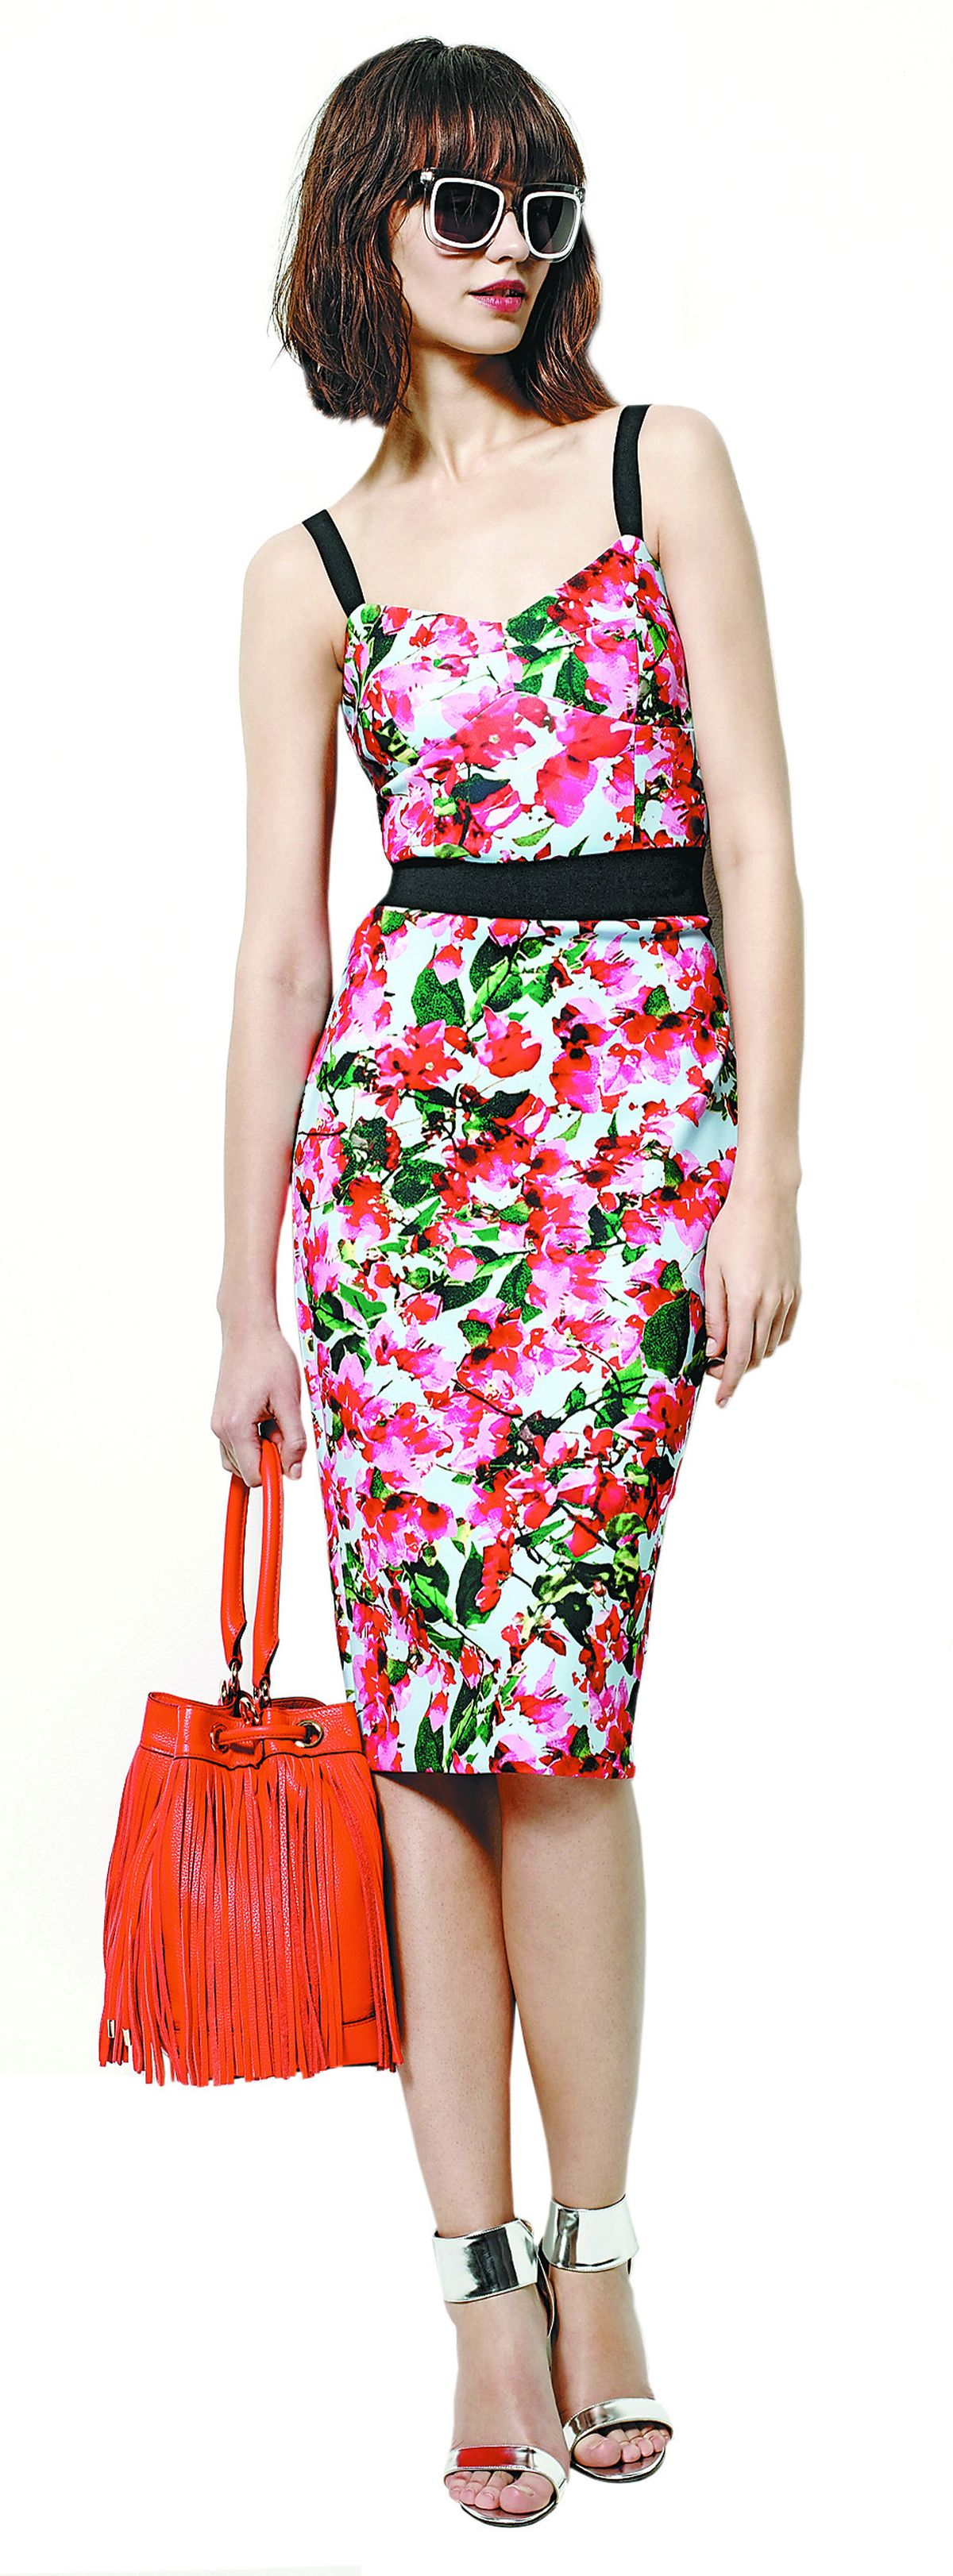 This floral print bustier midi dress ($74) comes from the limited-edition MILLY for DesigNation capsule collection at Kohl